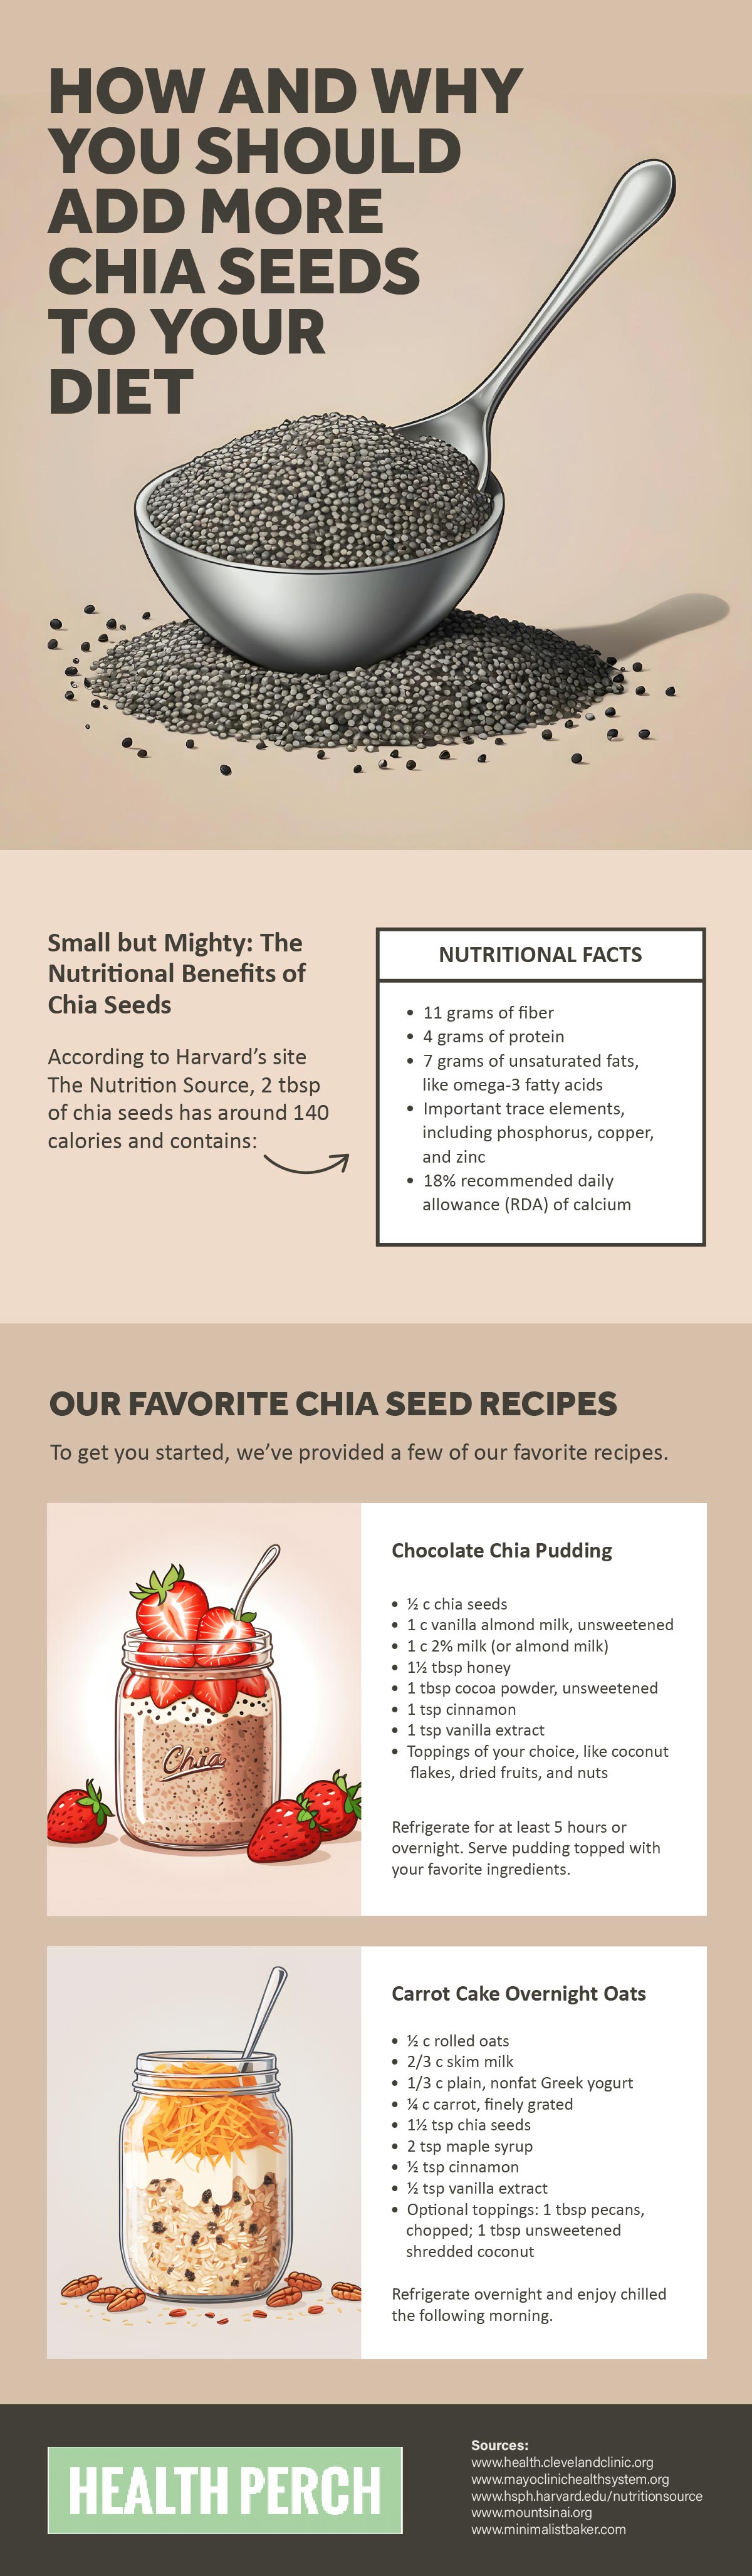 How and Why You Should Add More Chia Seeds to Your Diet Infographic